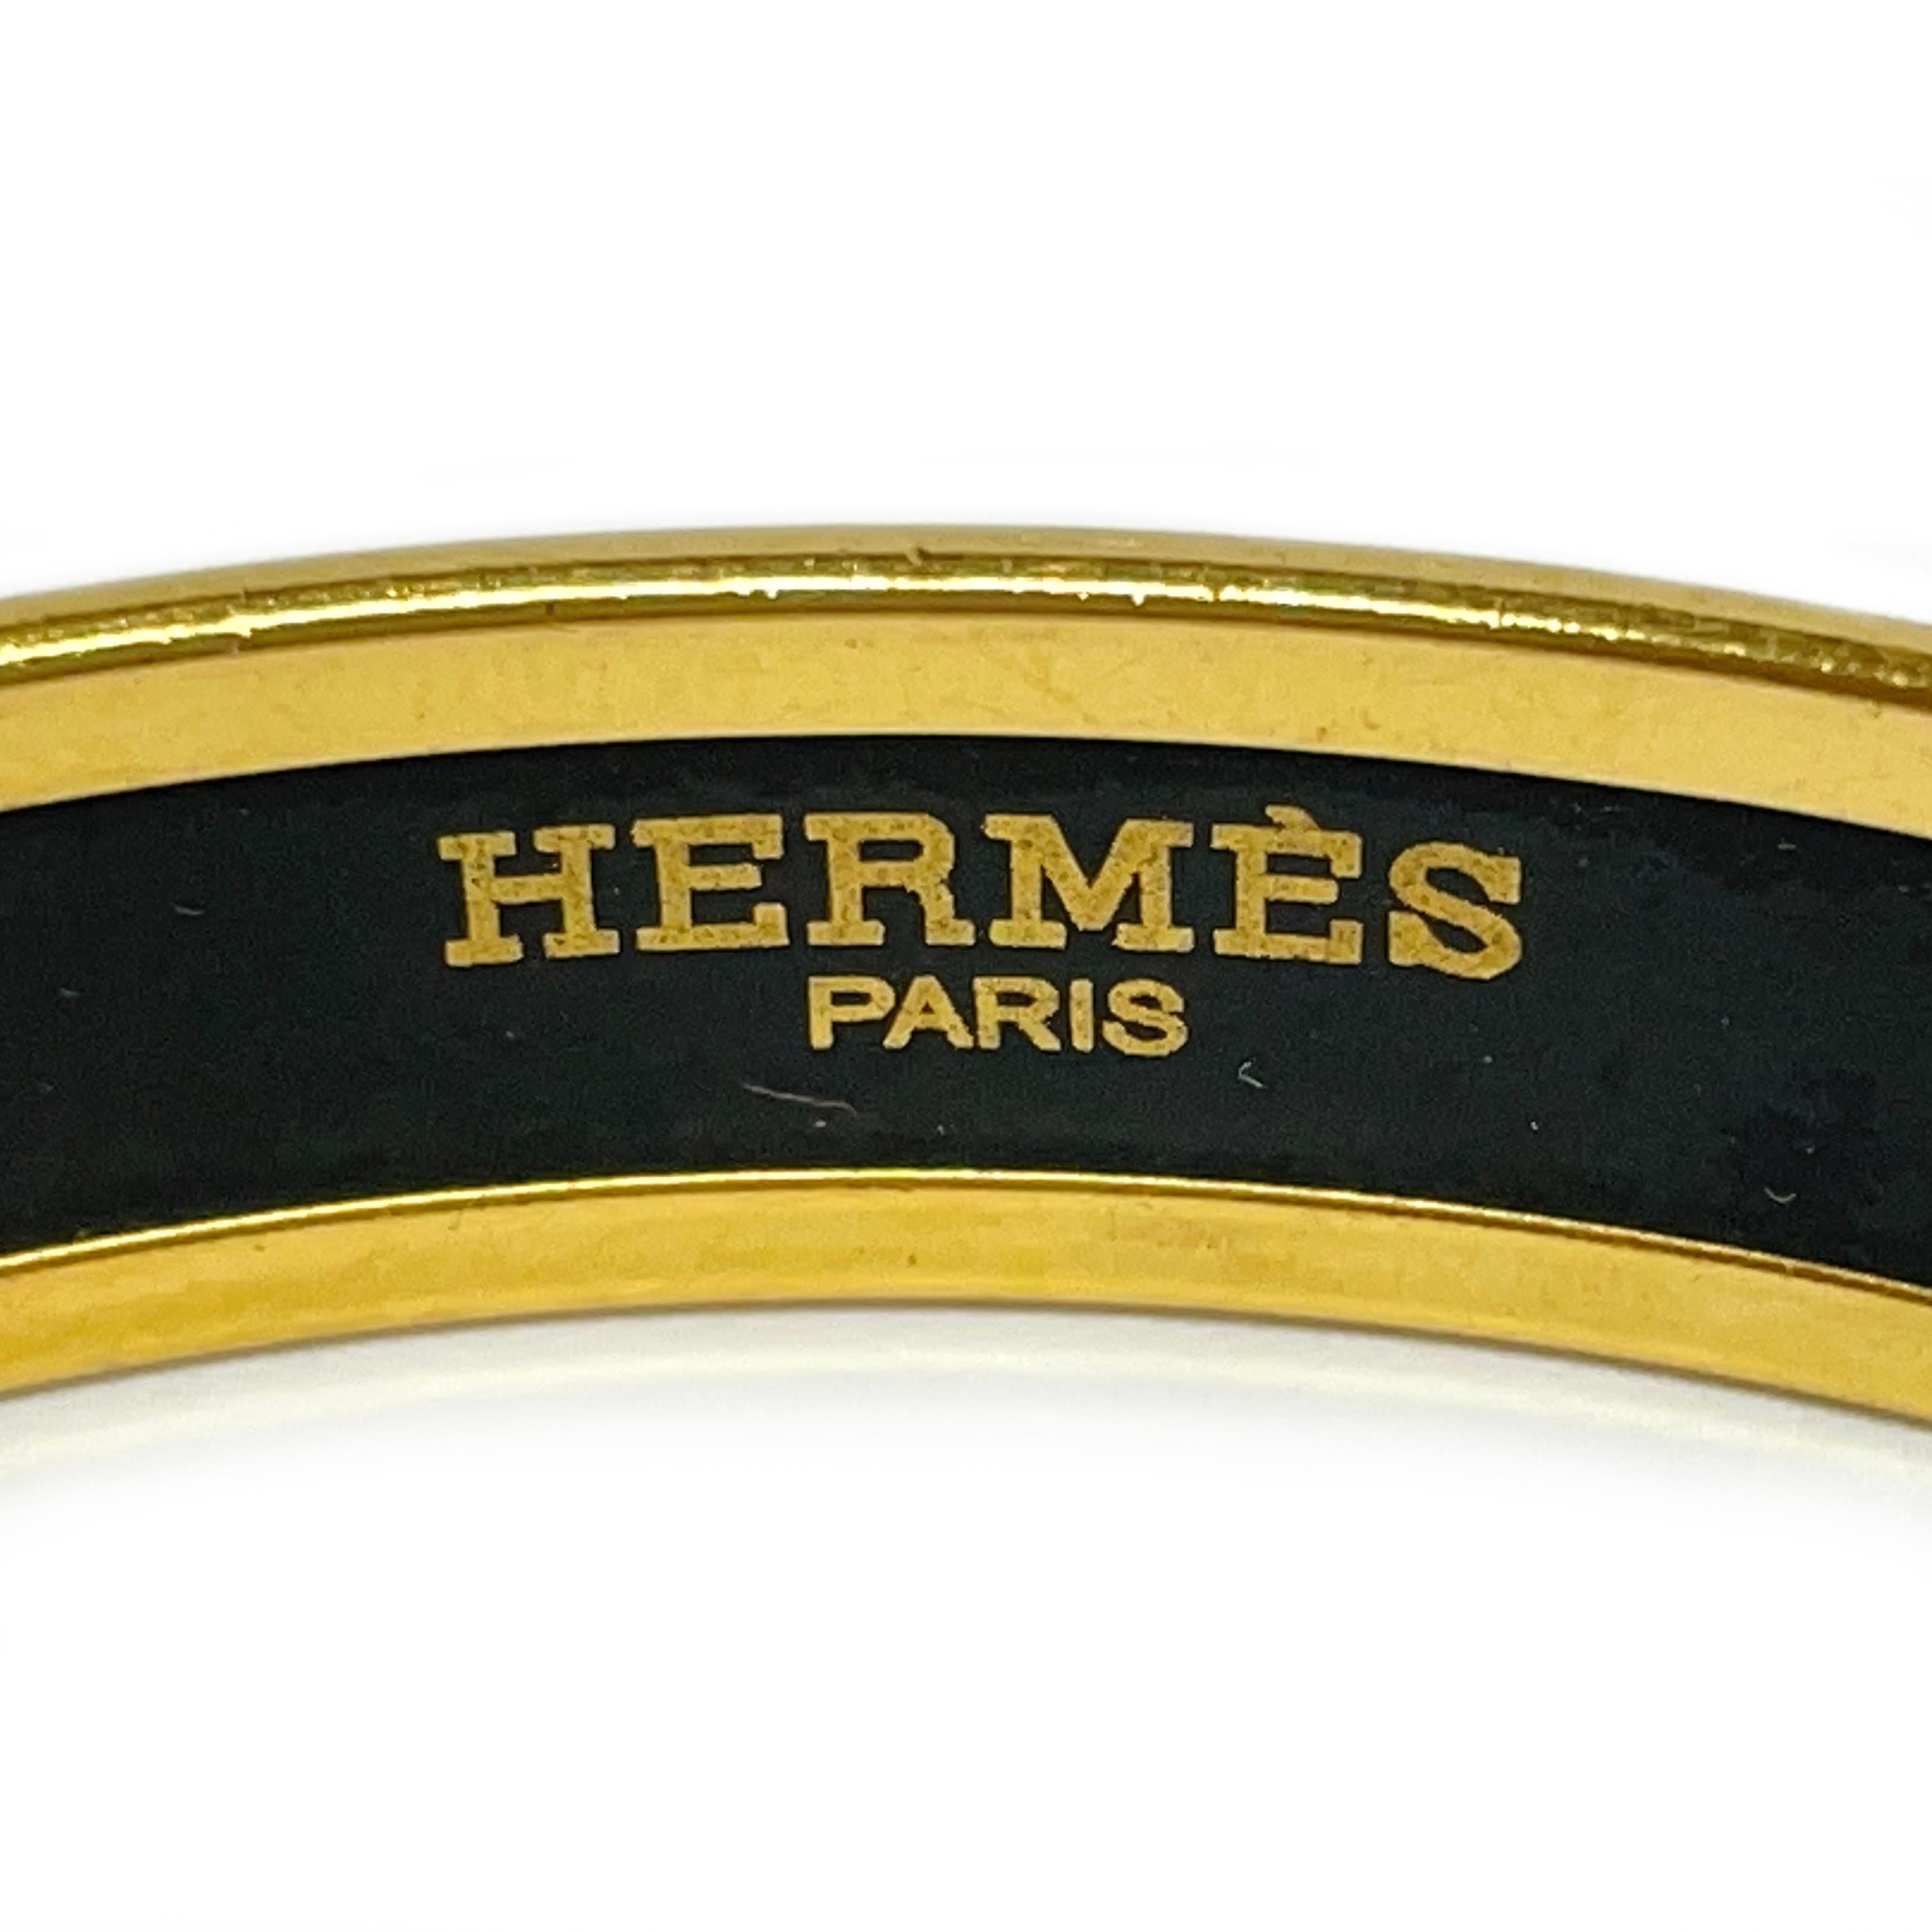 Hermes Fan Grand Alpala Cloisonne Enamel Black and Gold plated bangle bracelet. This chic bangle features classic Hermes motifs; rope, tassels, and, Fleur de Lis. The bangle has an all-around smooth finish. The bangle measures 10.4mm wide, with an